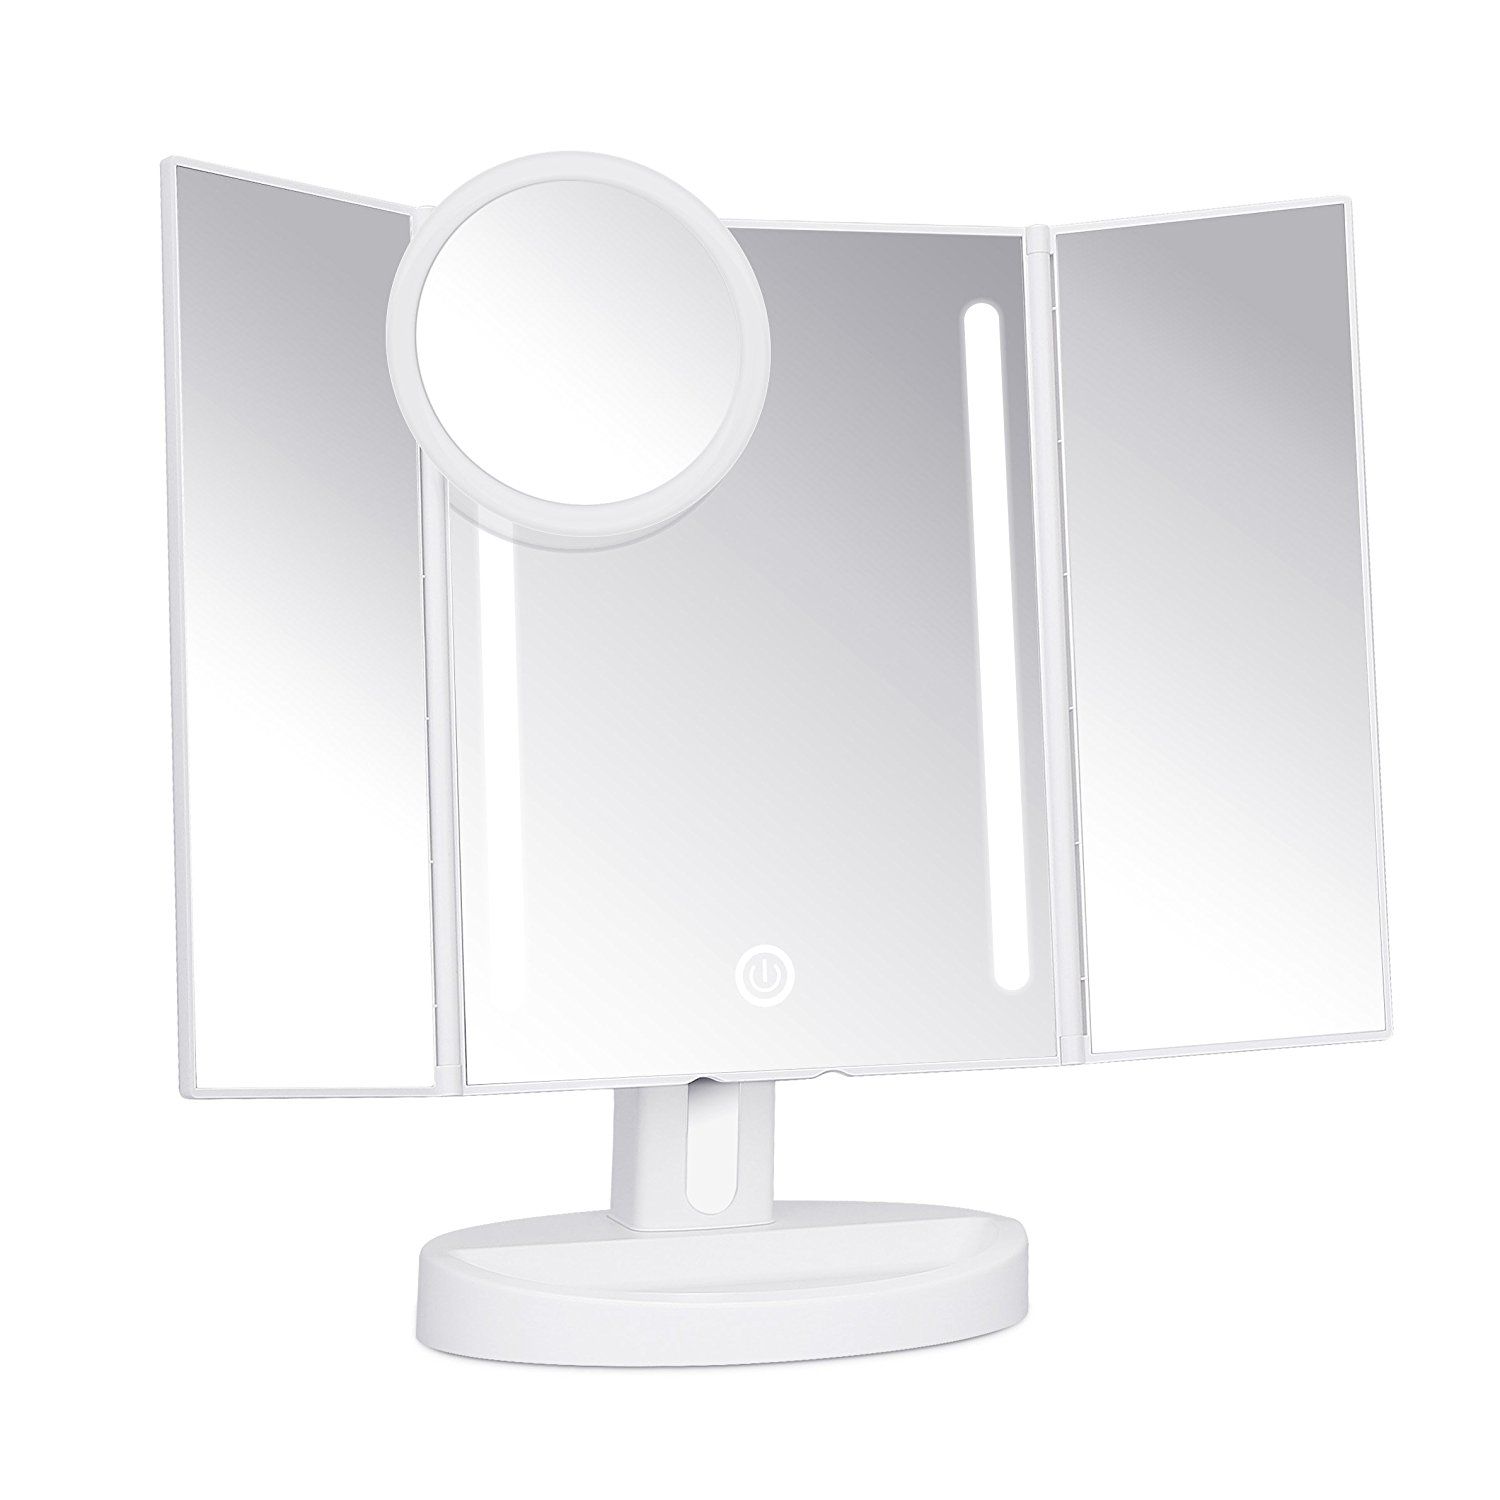 Amazon: Trifold LED Lighted Makeup Mirror with Touch Screen Only $25.49 Shipped!